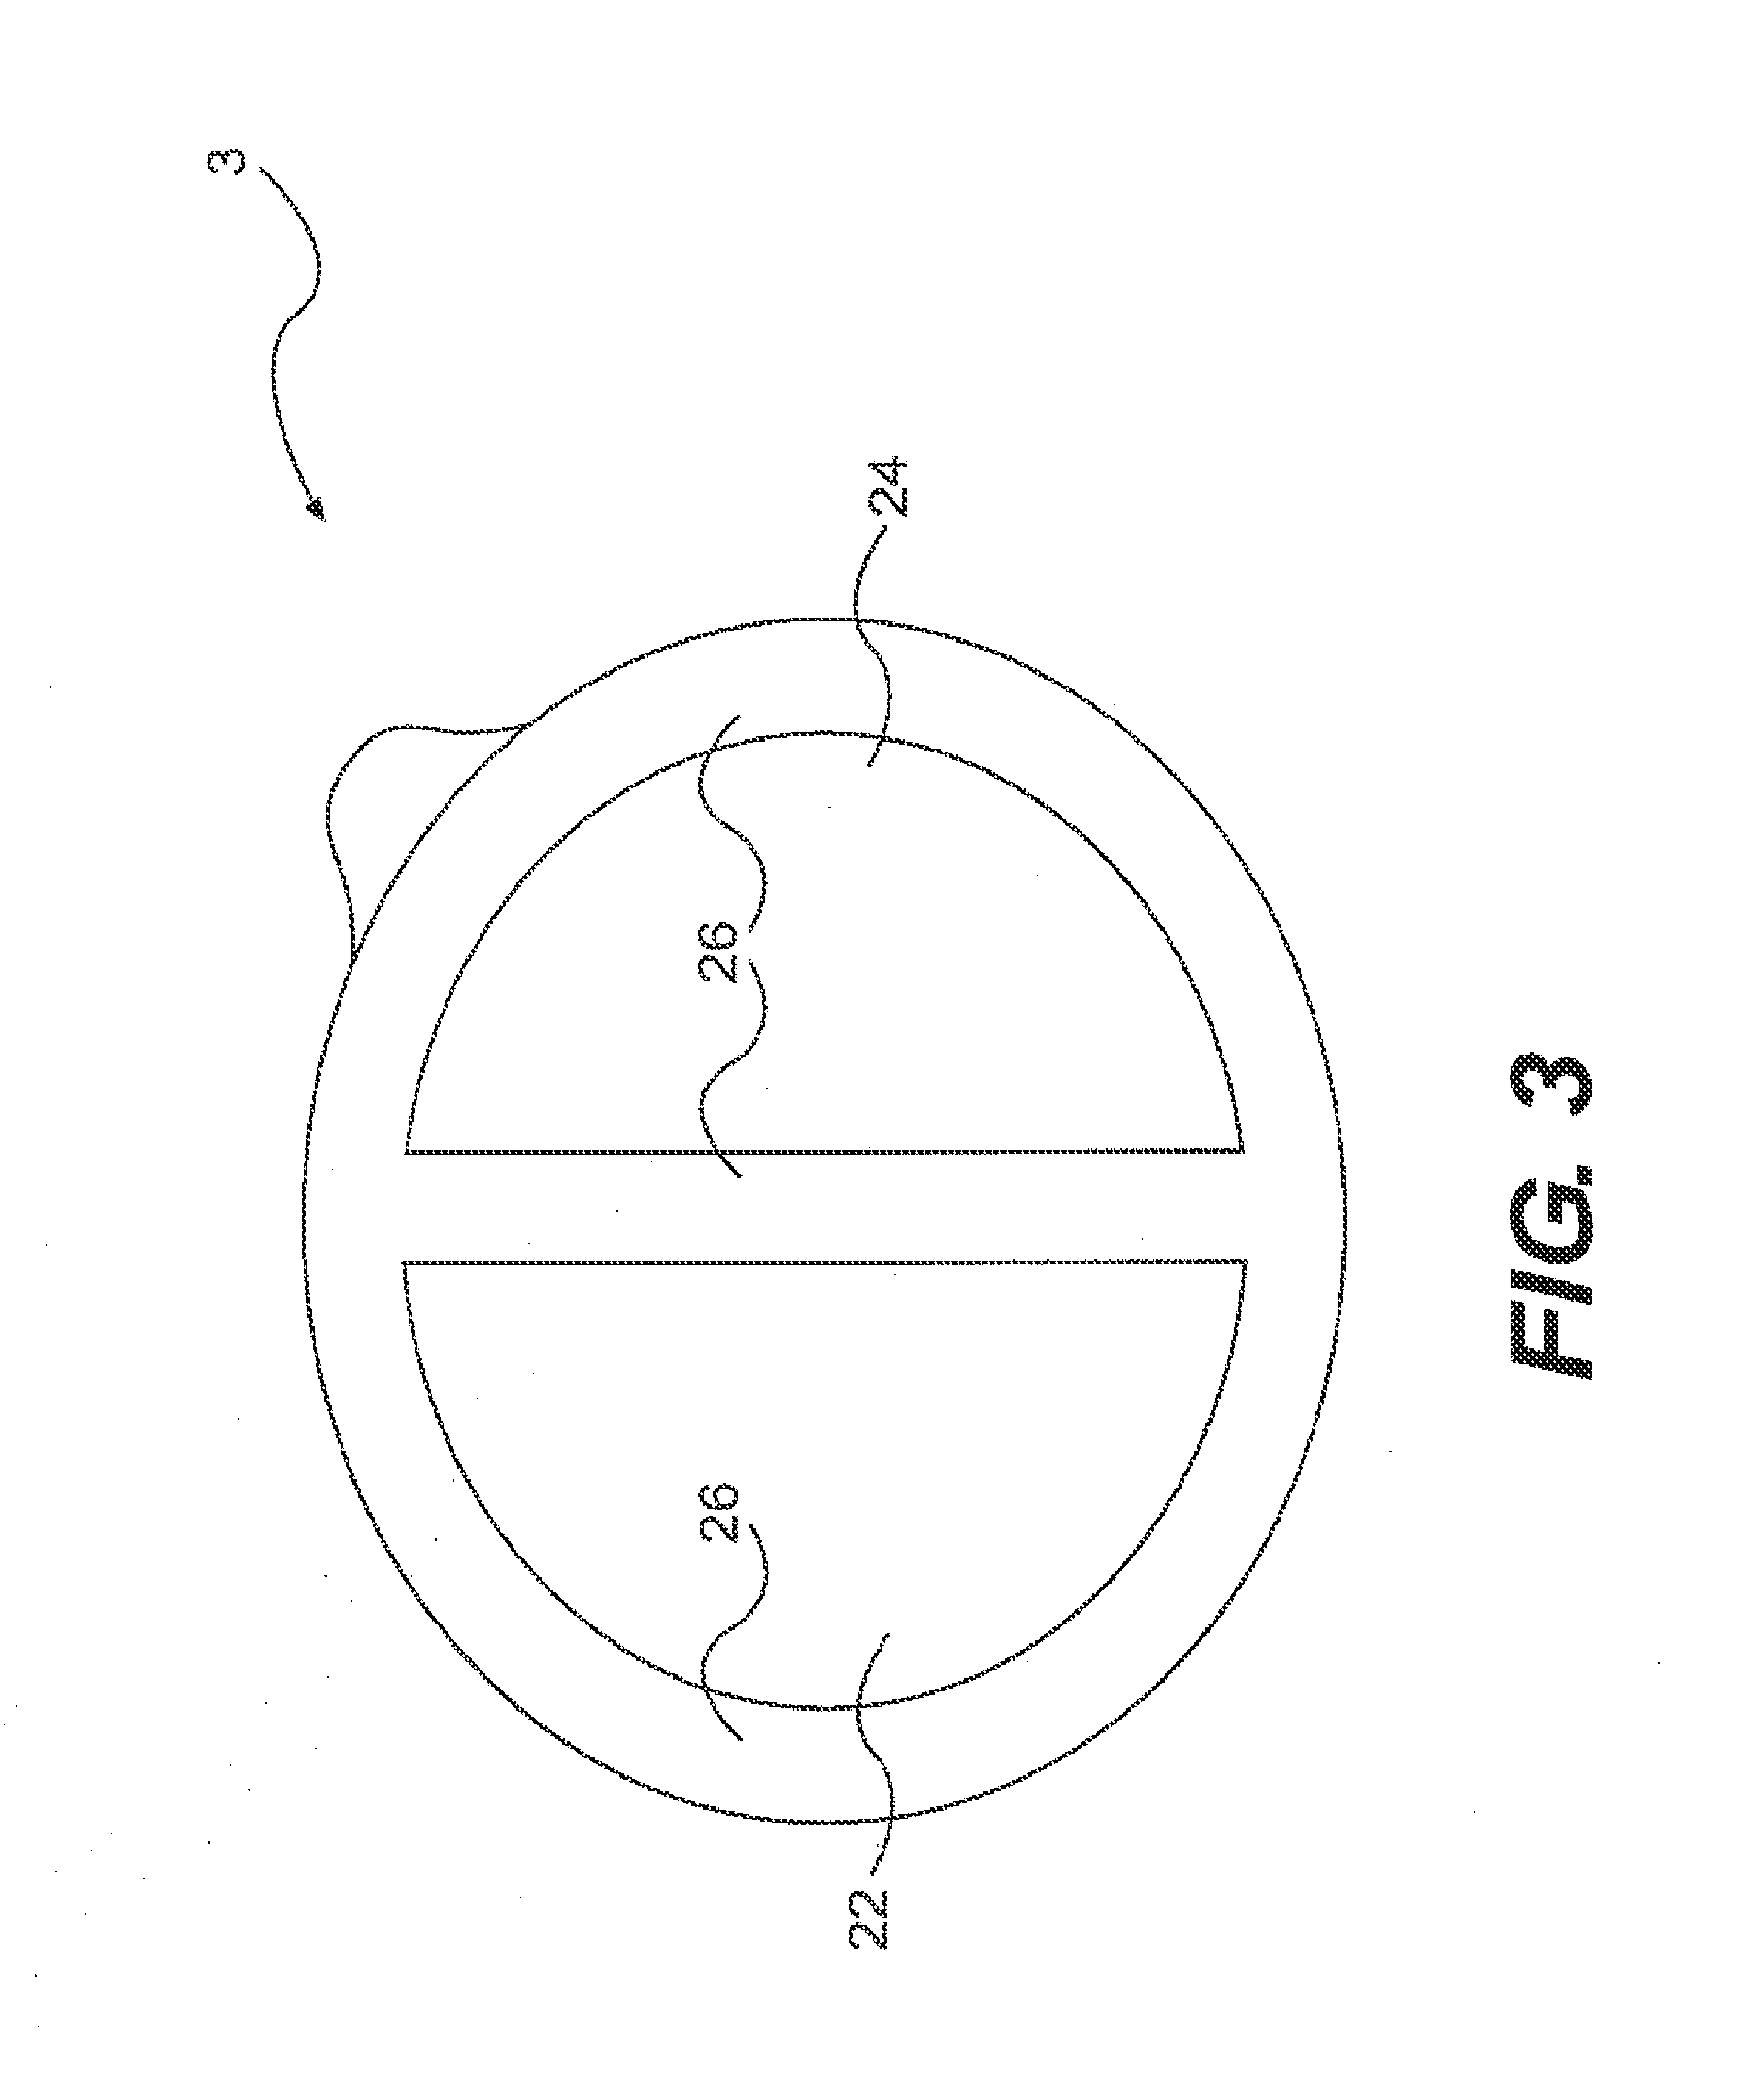 Pharmaceutical composition containing a hypomethylating agent and a histone deacetylase inhibitor